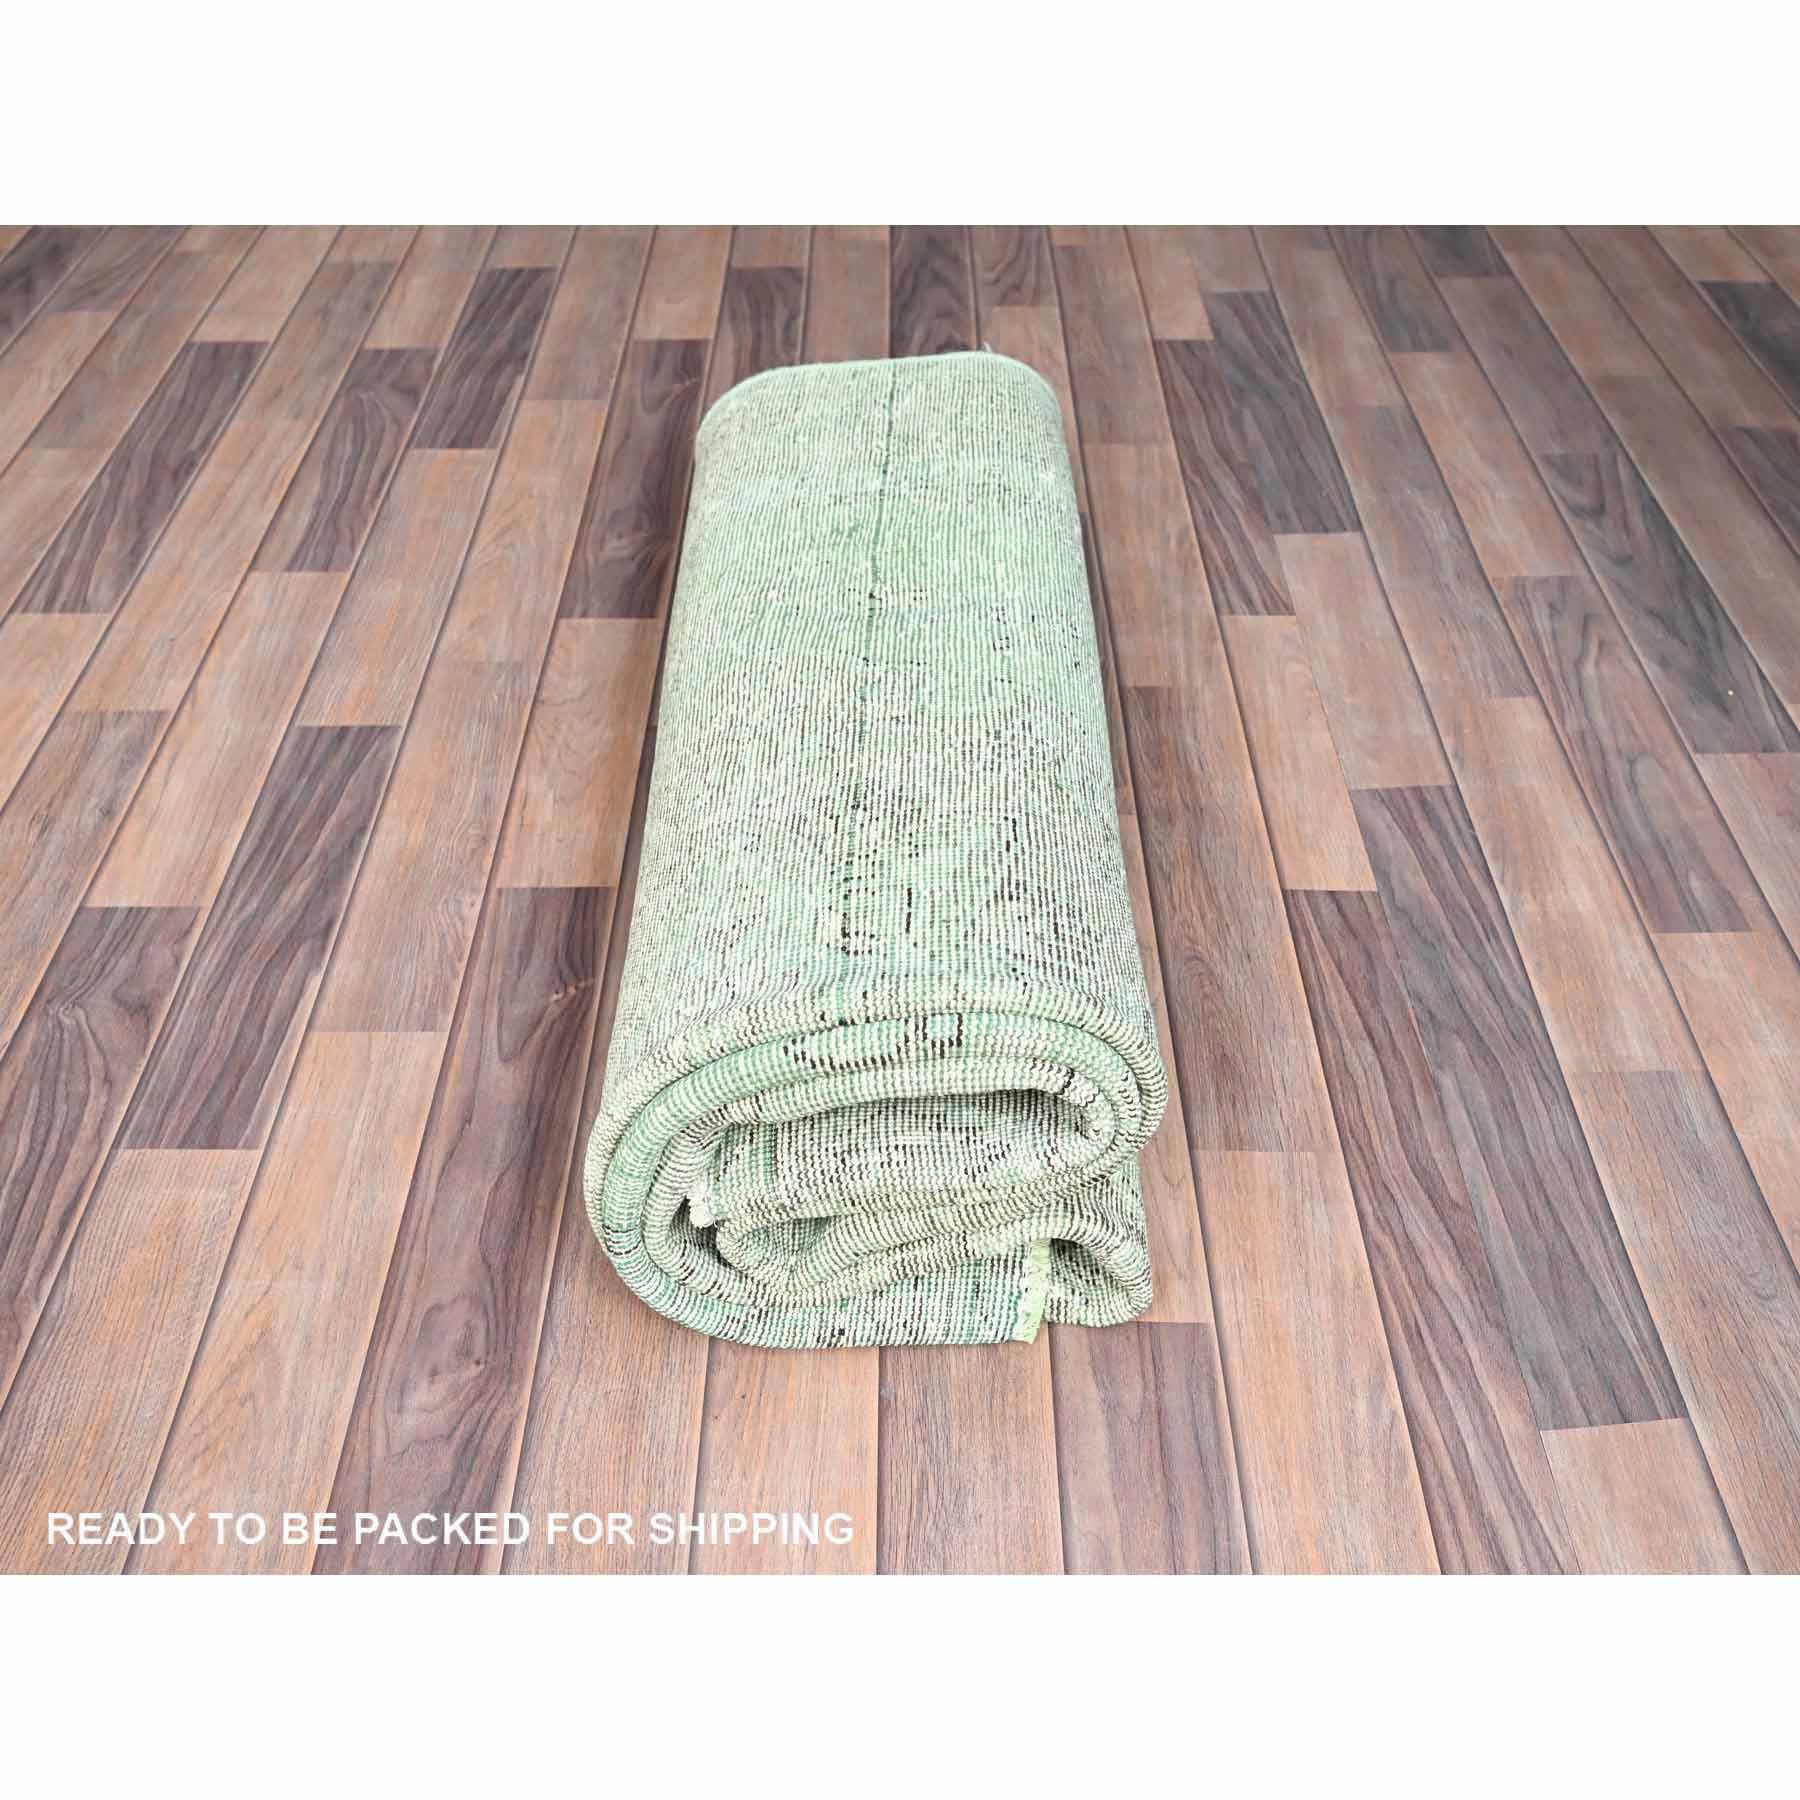 Overdyed-Vintage-Hand-Knotted-Rug-426990